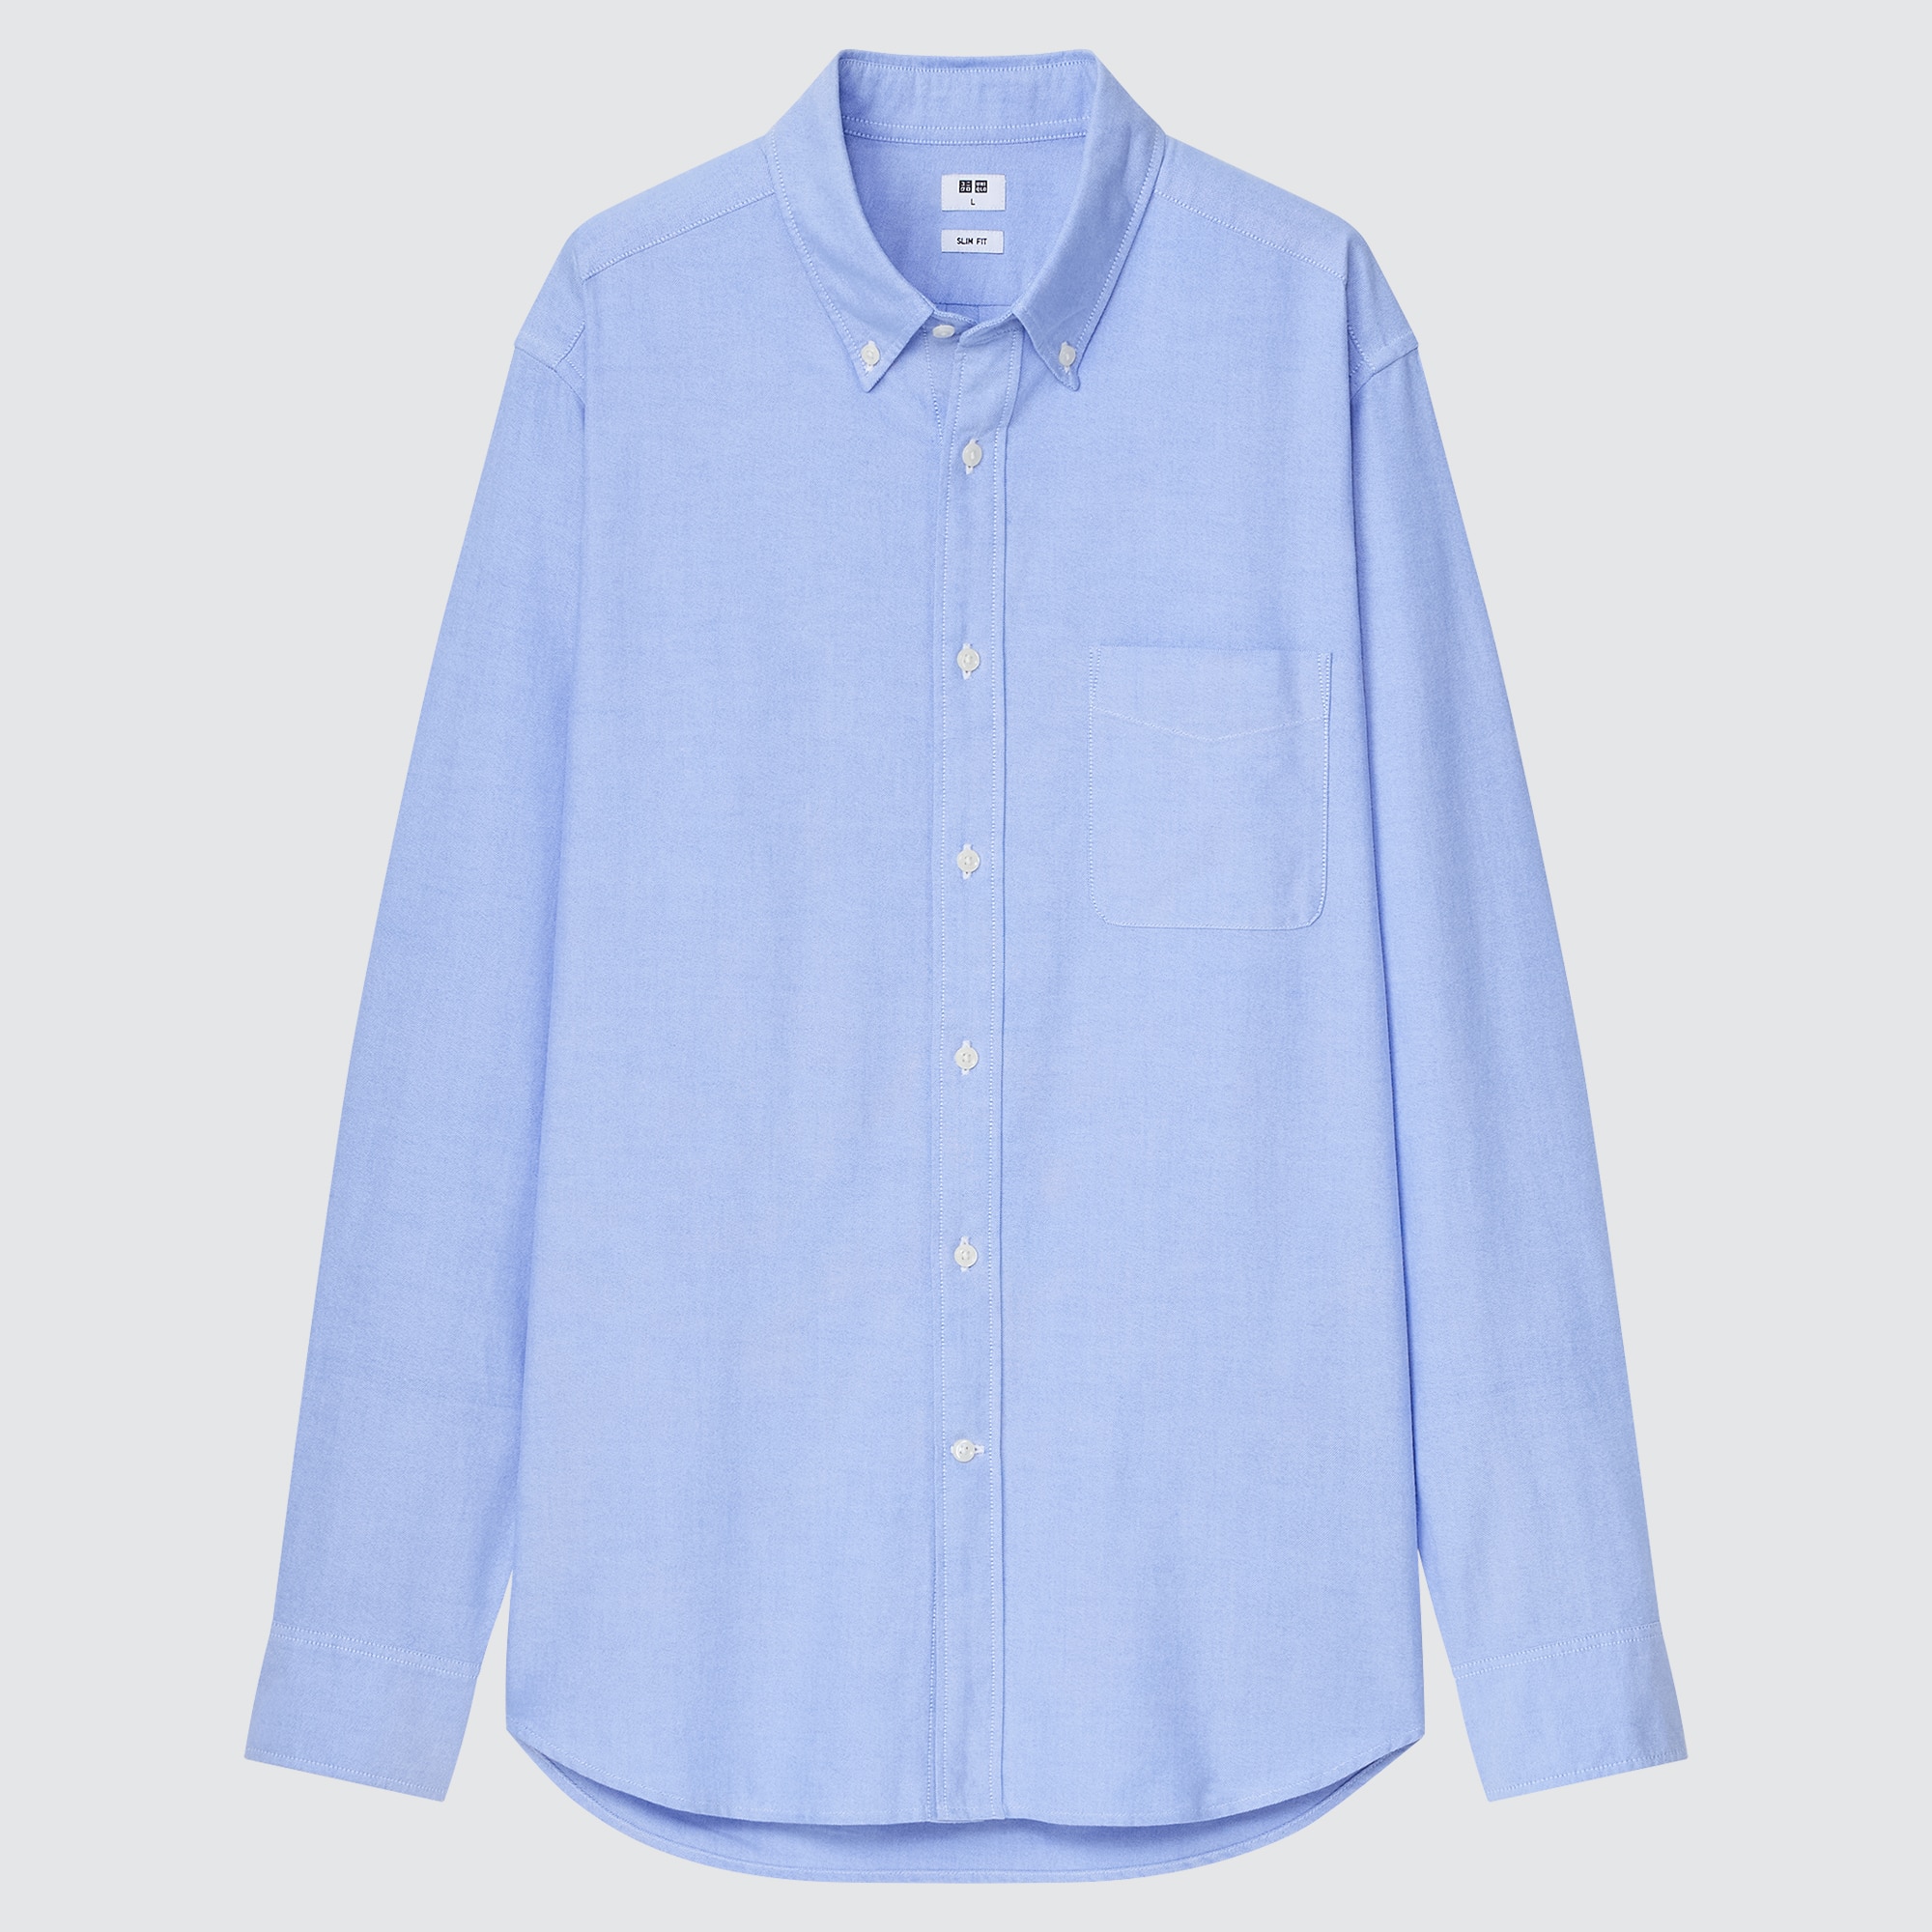 The Best Oxford Cloth Button Down Shirt Reviewed by Typical Contents